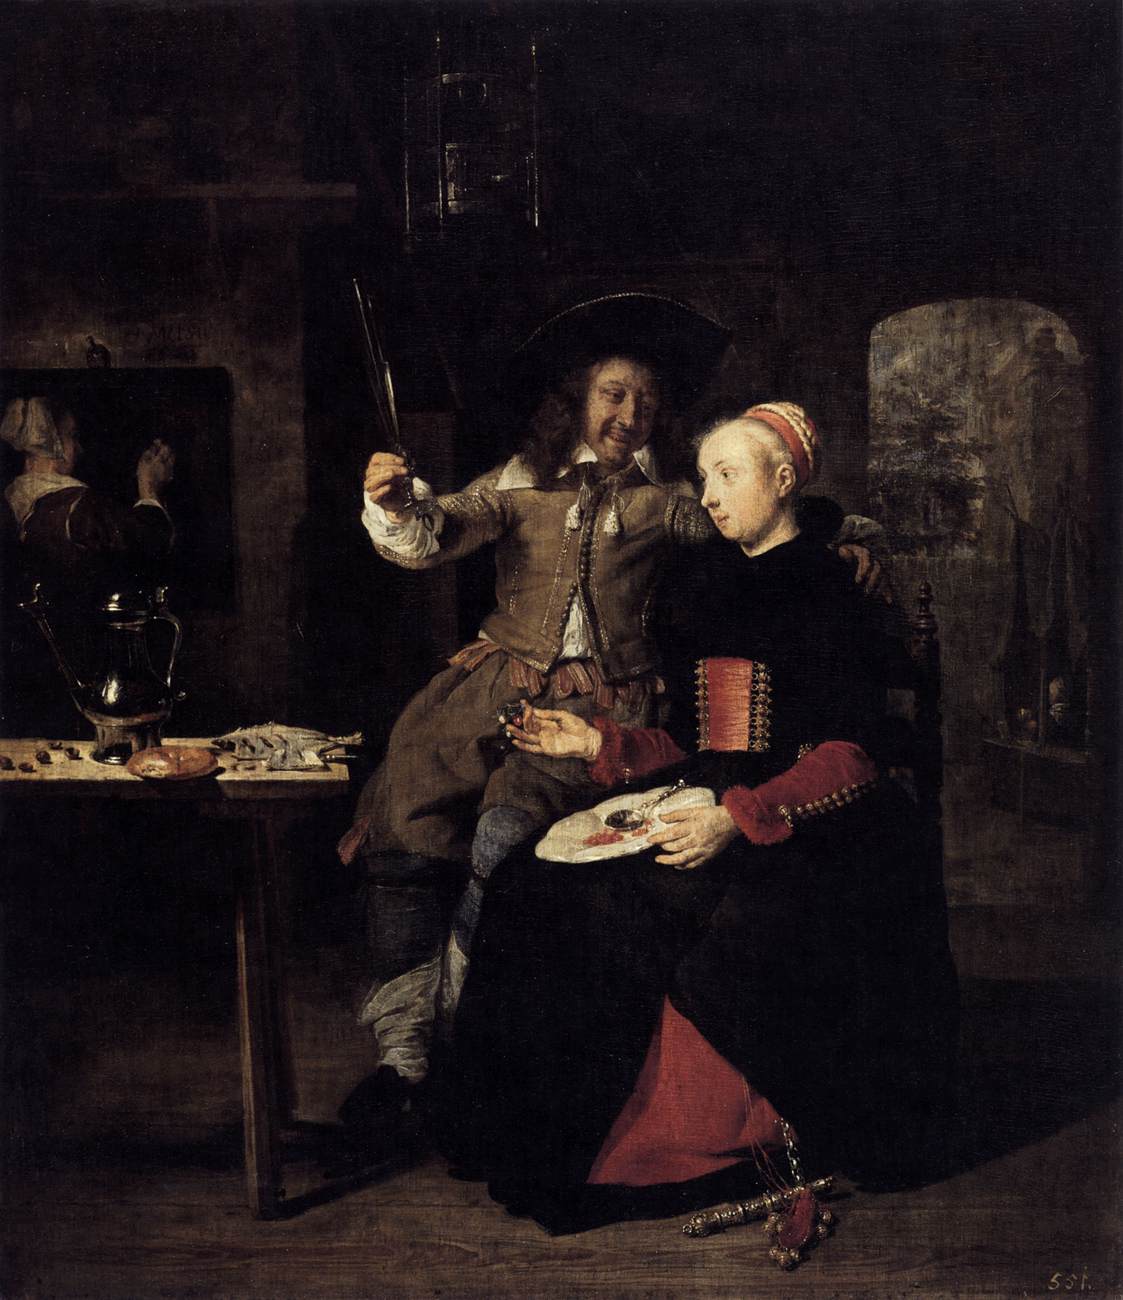 Portrait Of The Artist With His Wife Isabella de Wolff In A Tavern by Gabriel Metsu